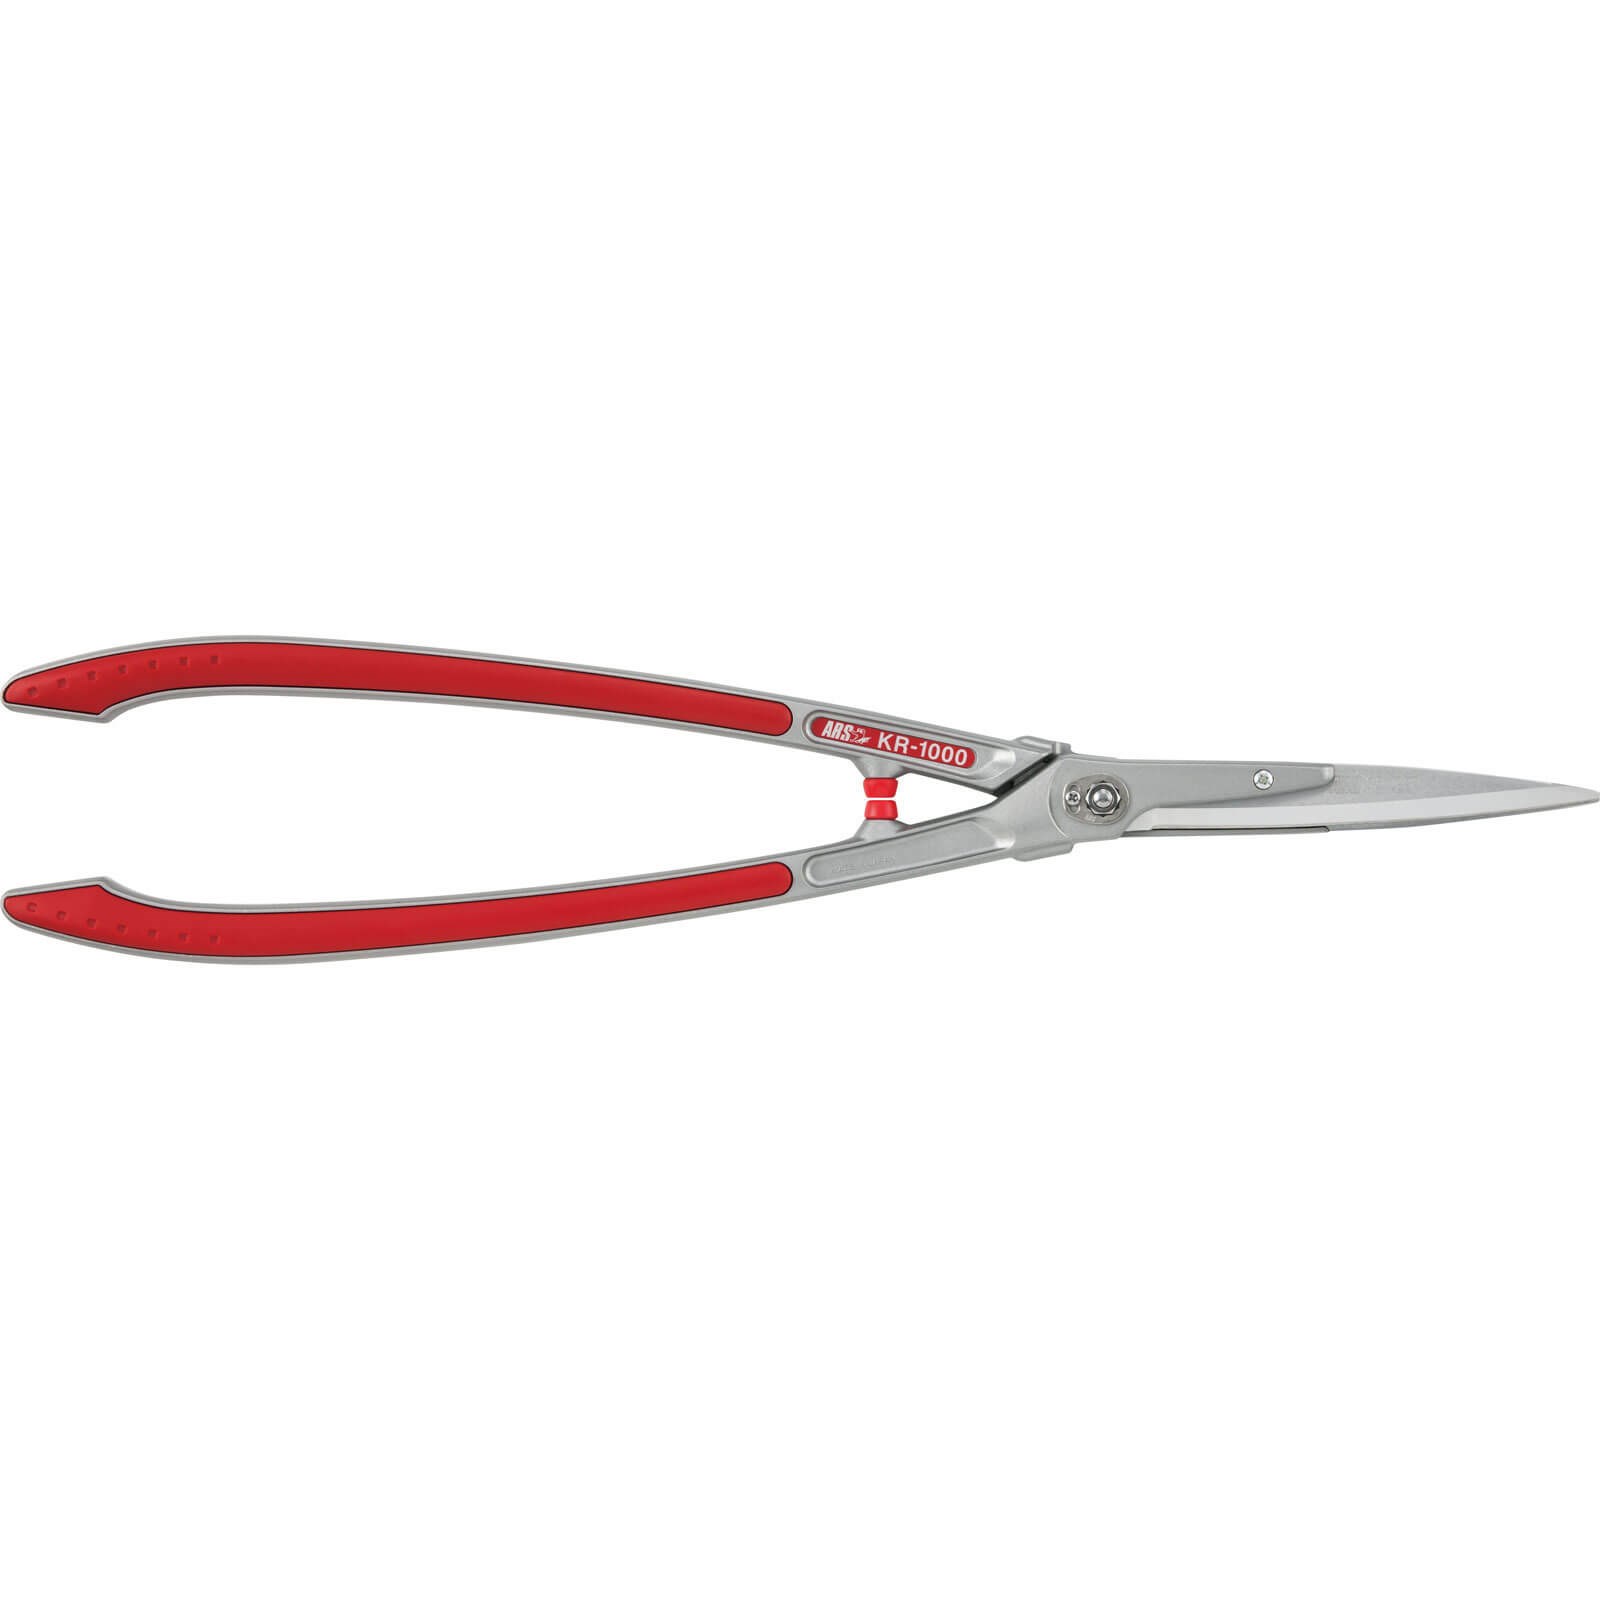 Ars replaceable blade type lightweight cutting shears KR-1000